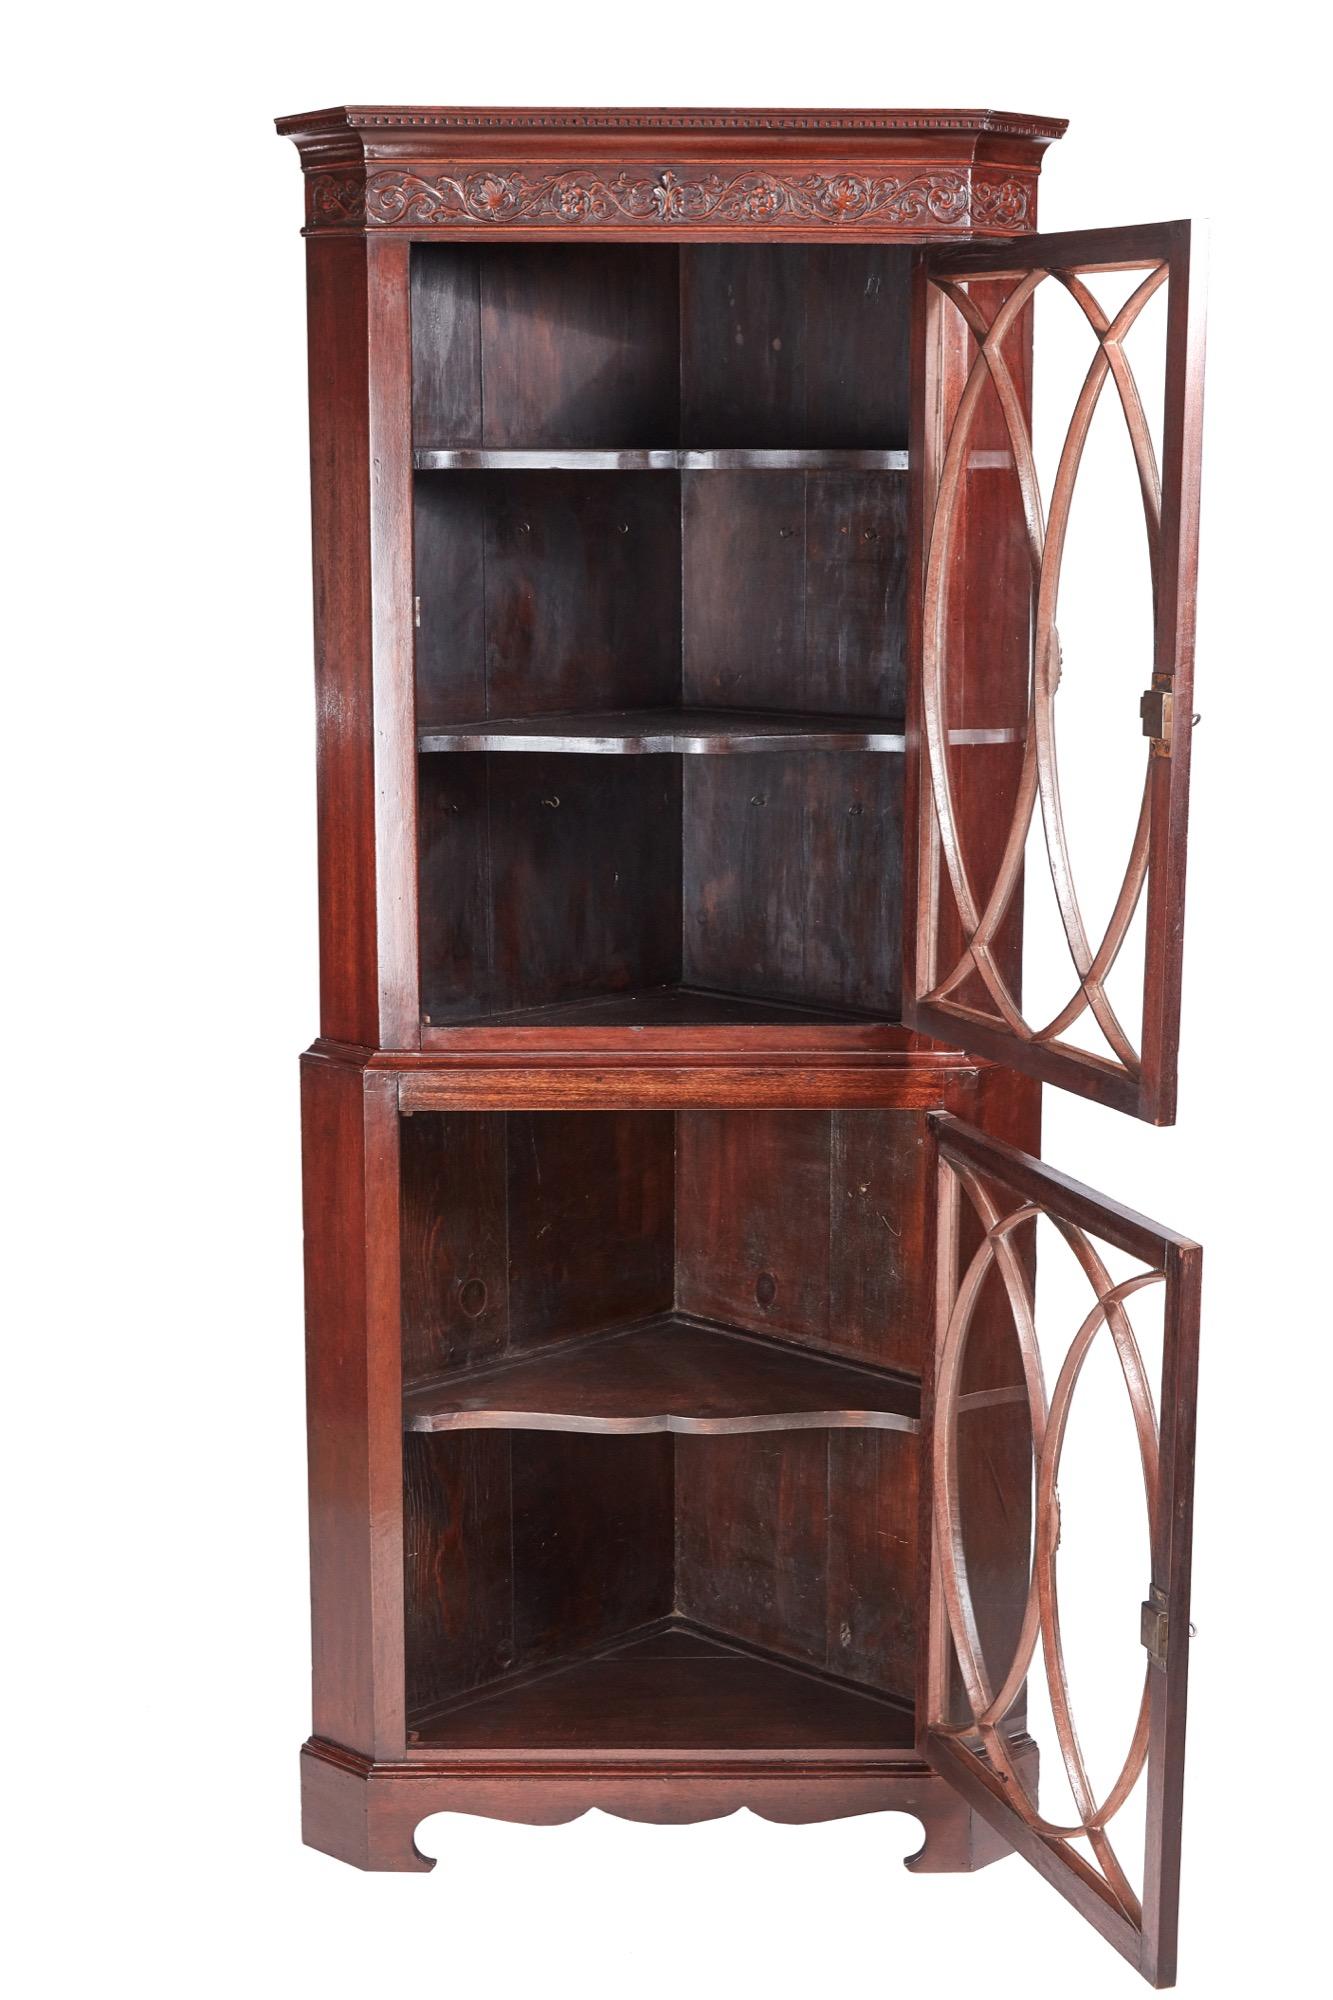 Antique mahogany astragal glazed corner cabinet with an attractive shaped cornice on the top section and a carved frieze. The shaped carved astragal glazed door opens to reveal two shaped shelves. The lower section has one shaped carved astragal